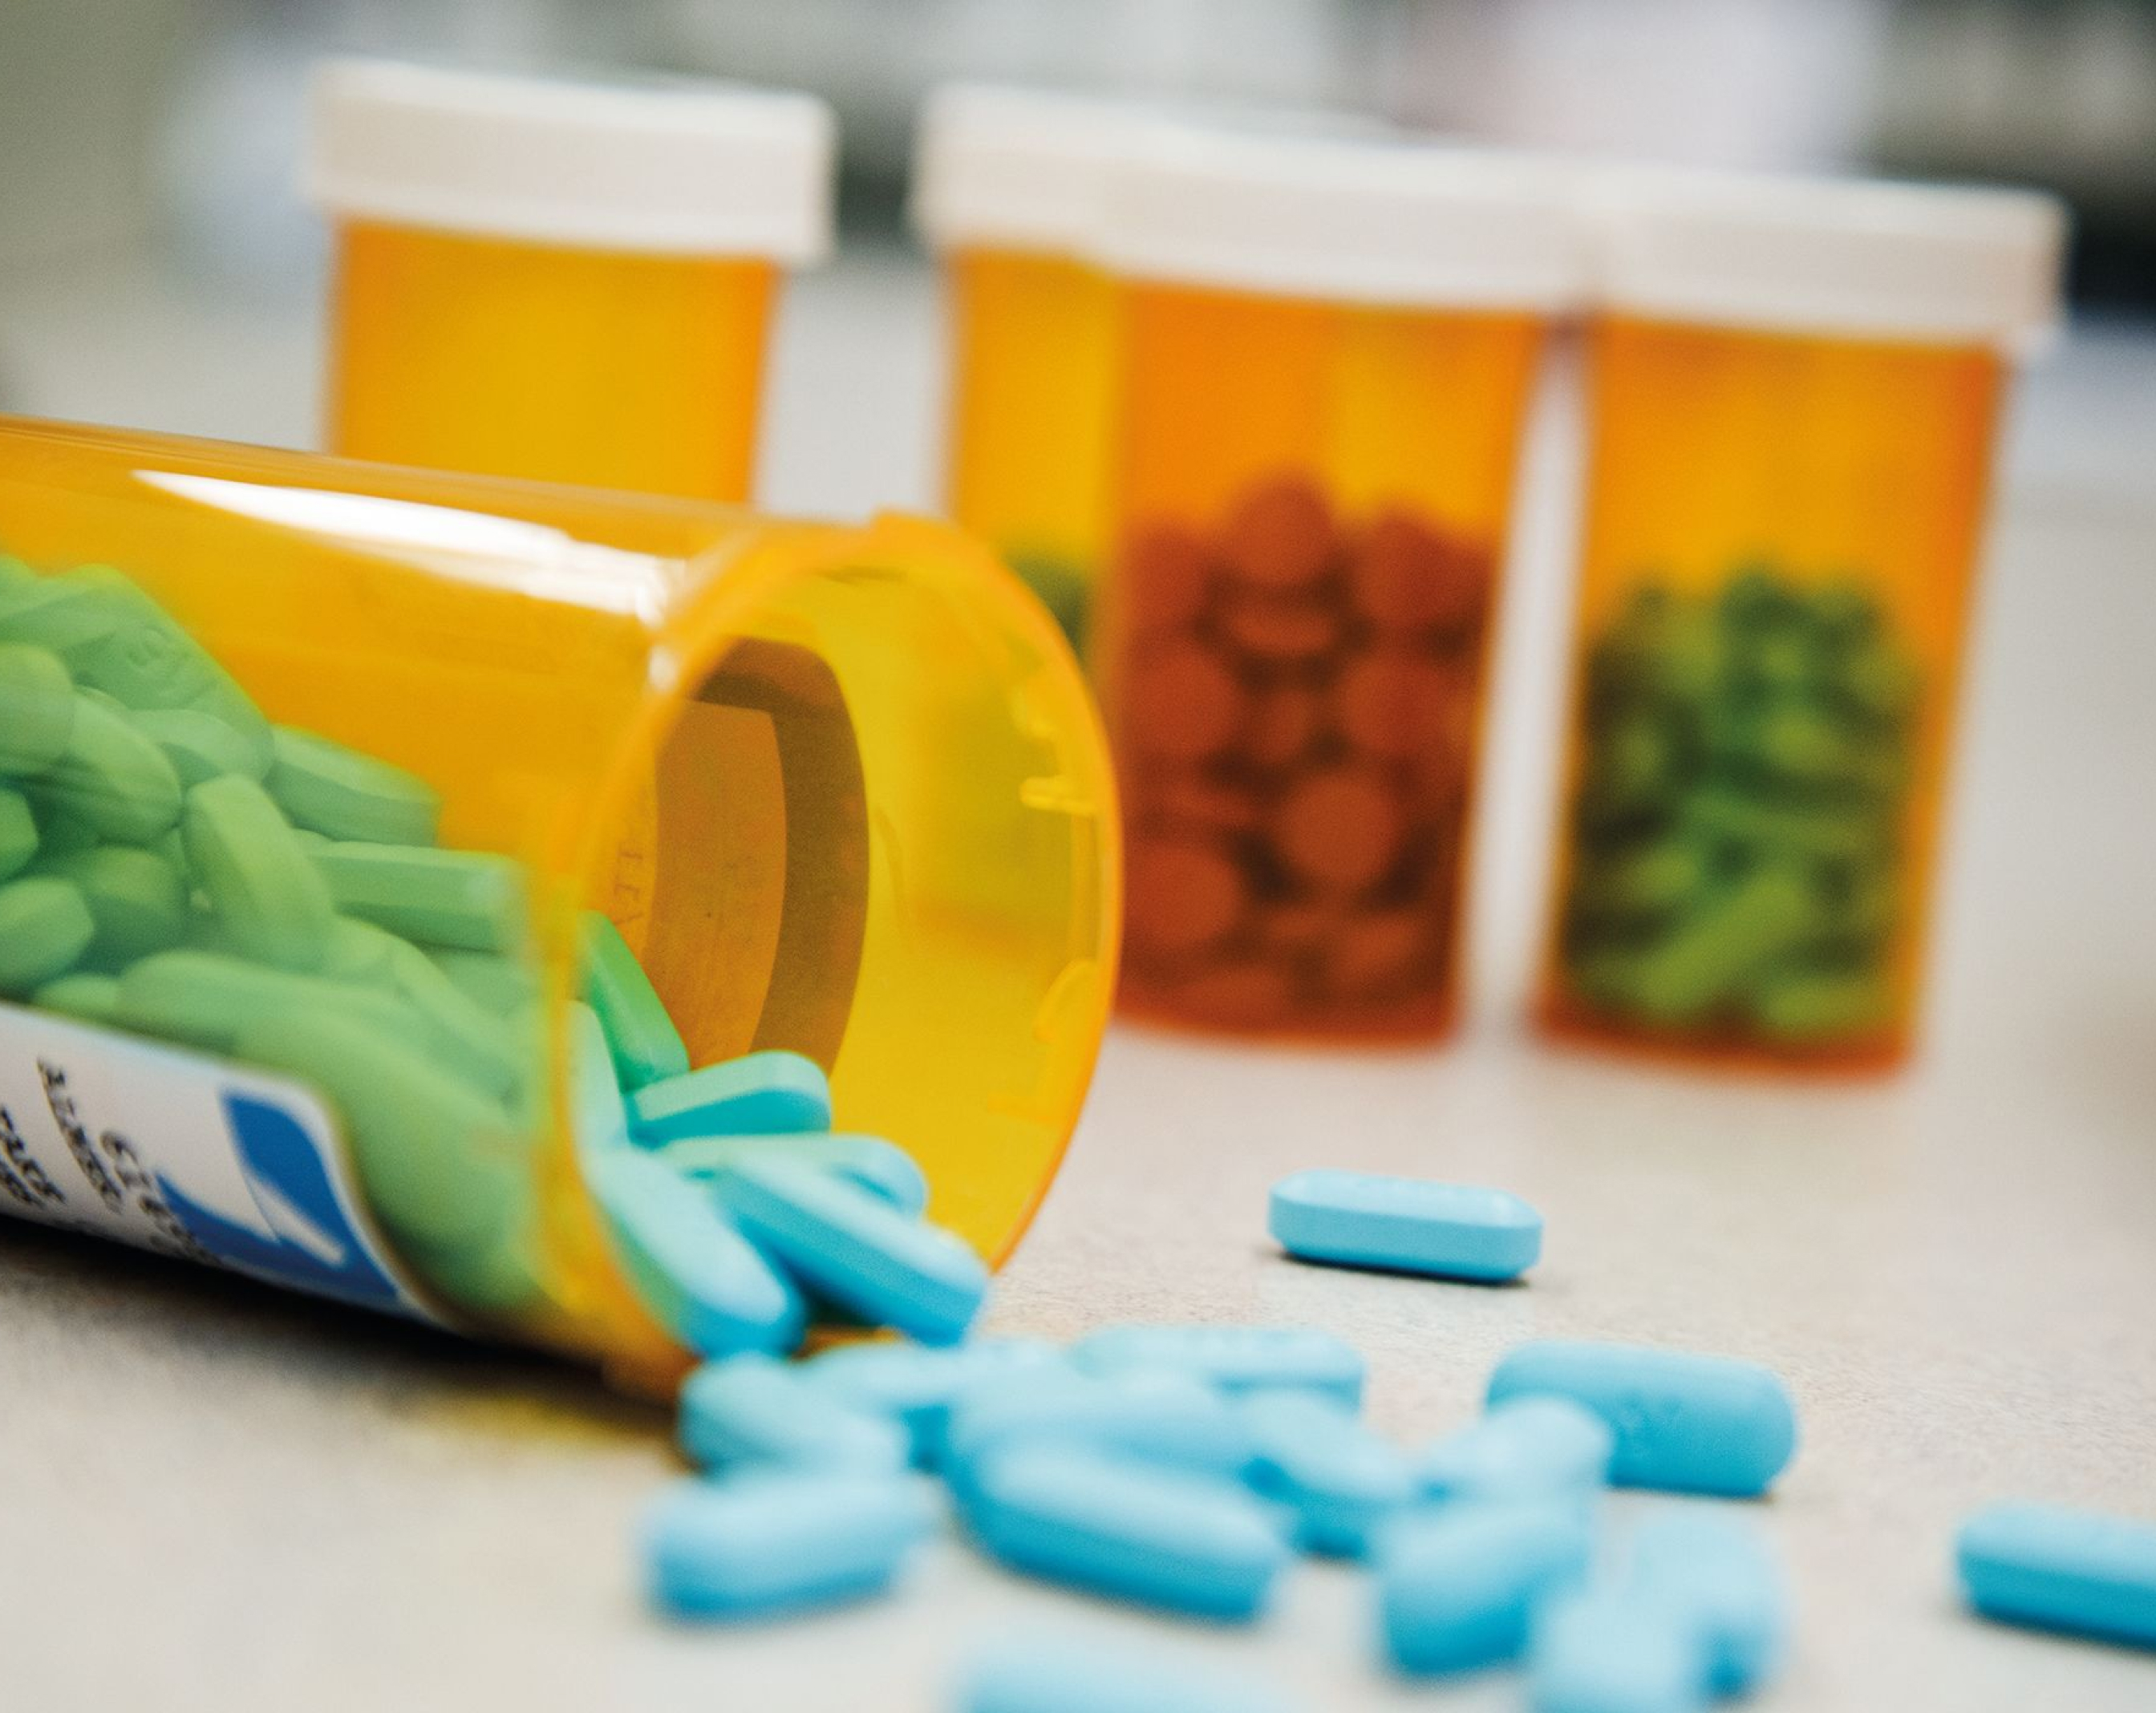 medications within pharmacy supply chain leads to improved patient care